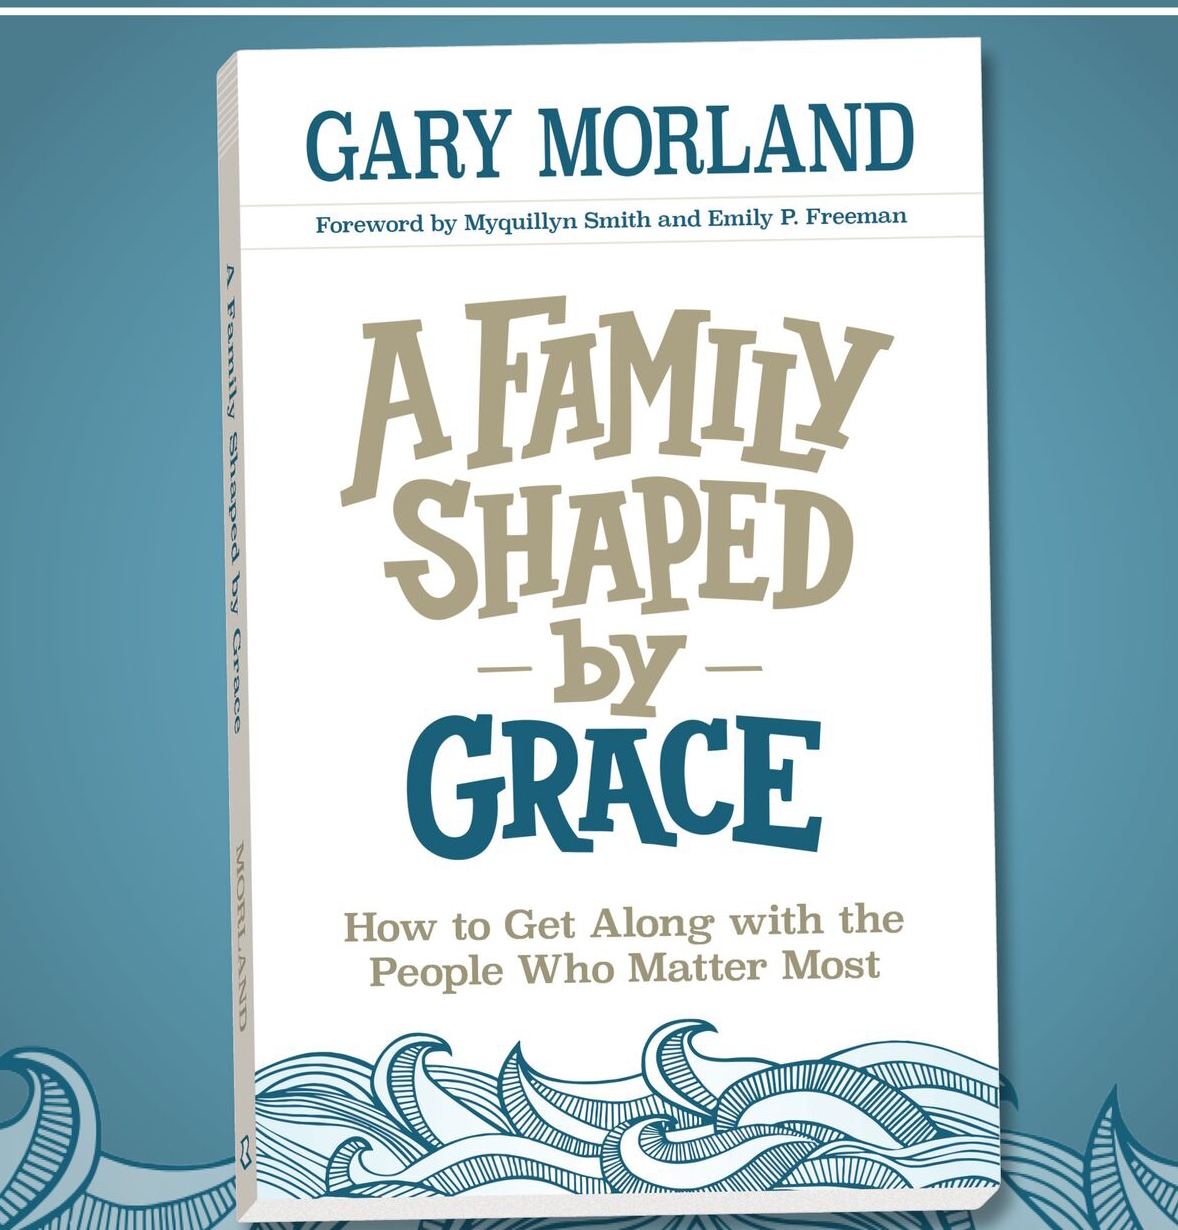 “A Family Shaped by Grace”- Gary Morland